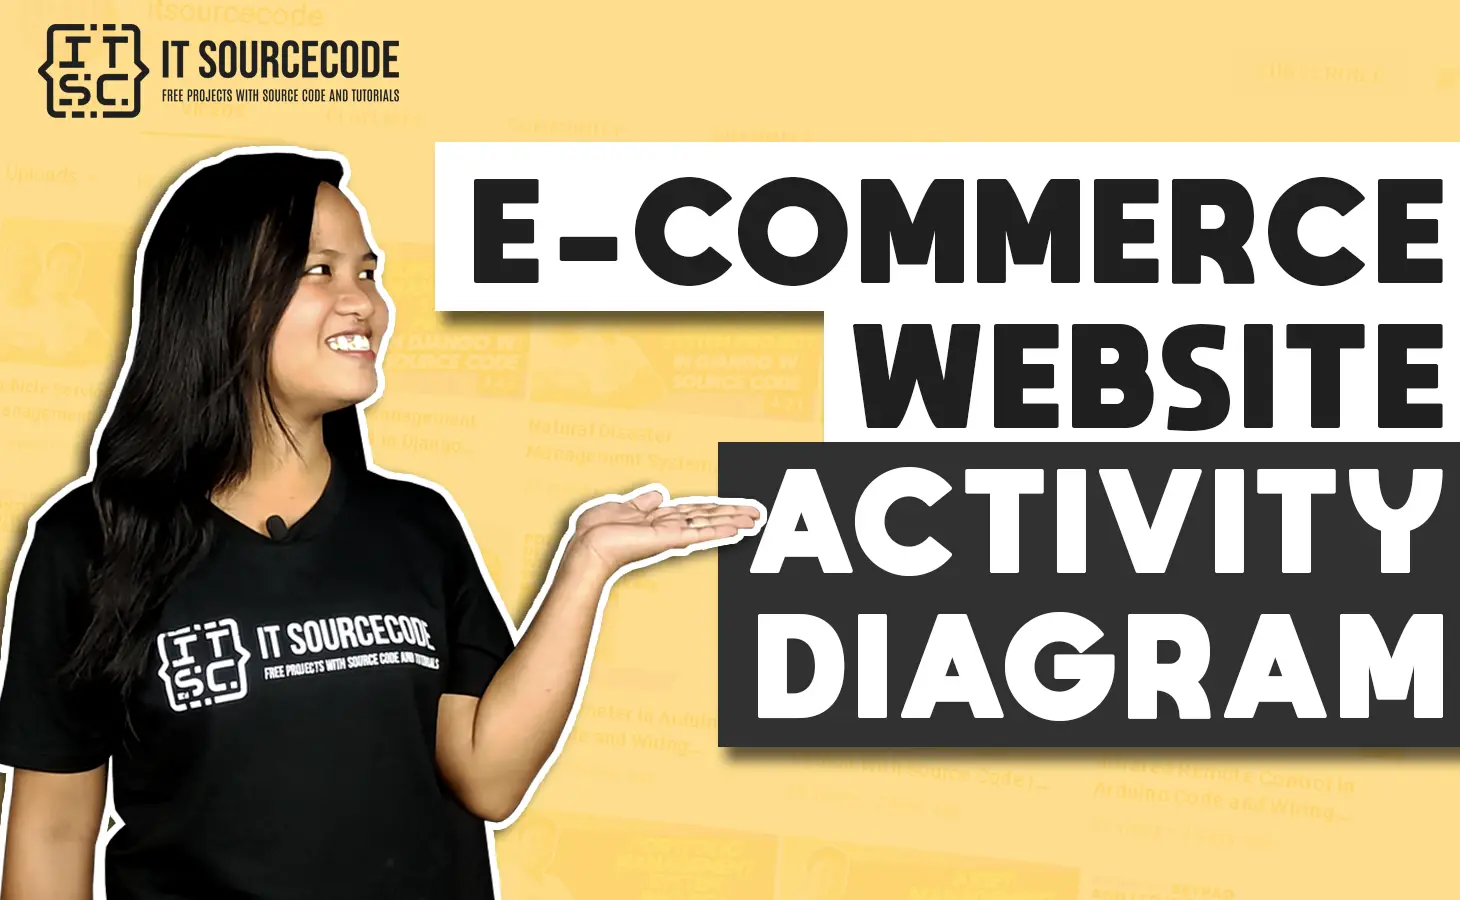 Activity Diagrams of E-Commerce Website System